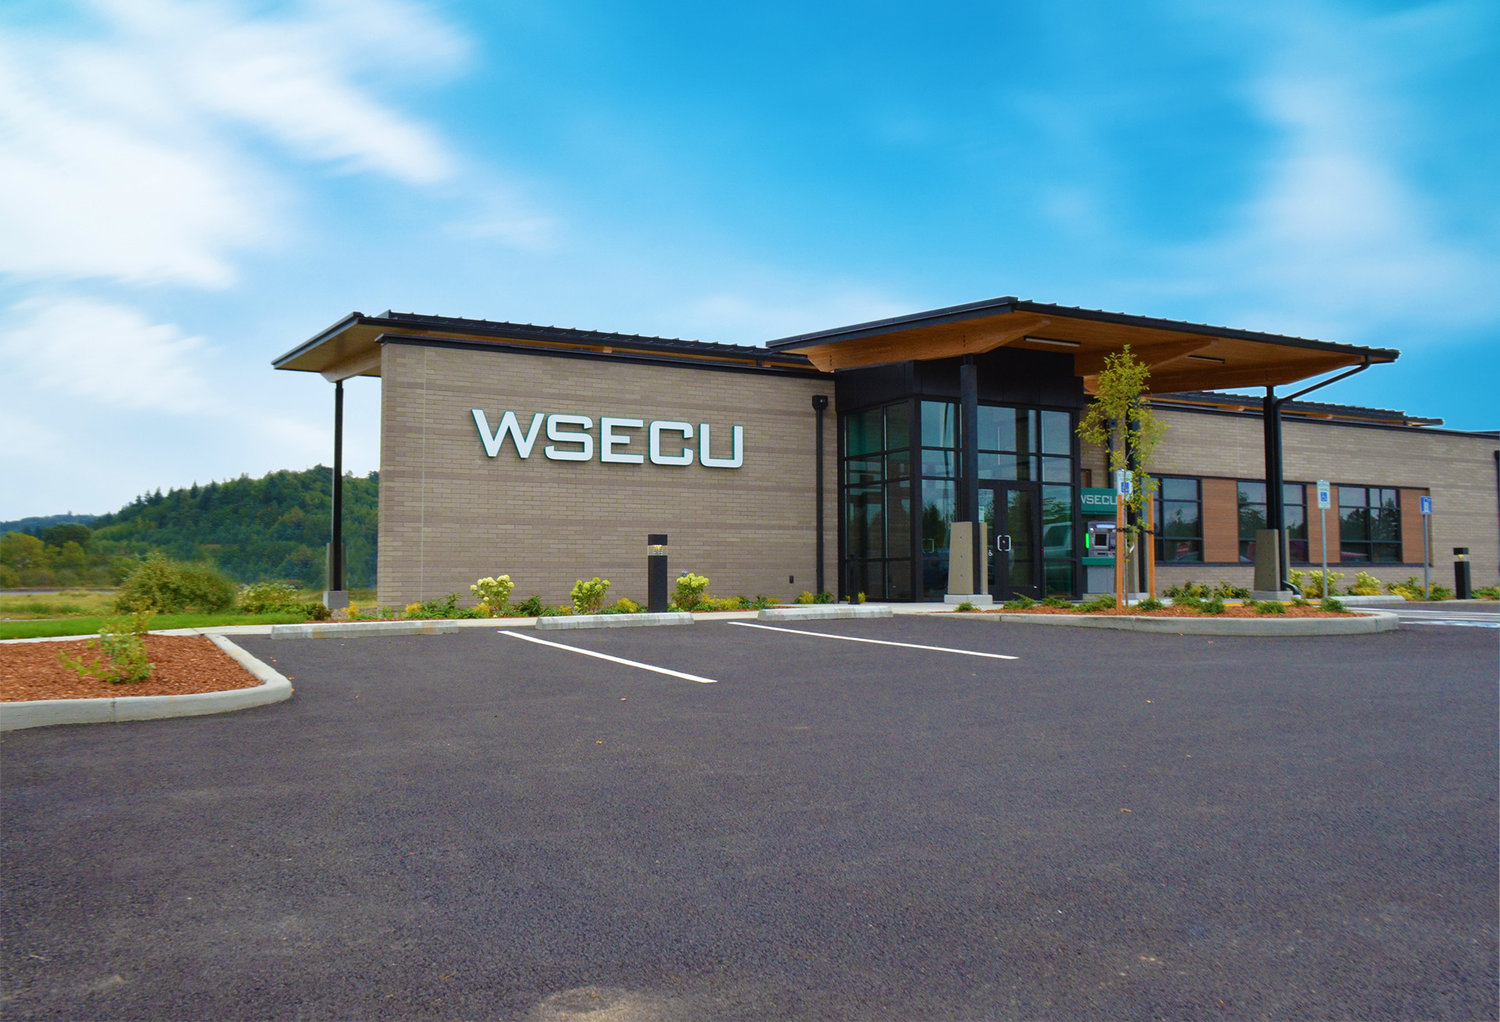 The Chehalis Washington State Employee Credit Union branch opened its new location at 1725 NW Louisiana Ave. Monday. The new building is 4,500 square feet and features four teller “pods,” allowing both simple and complex visits to be supported in one place.